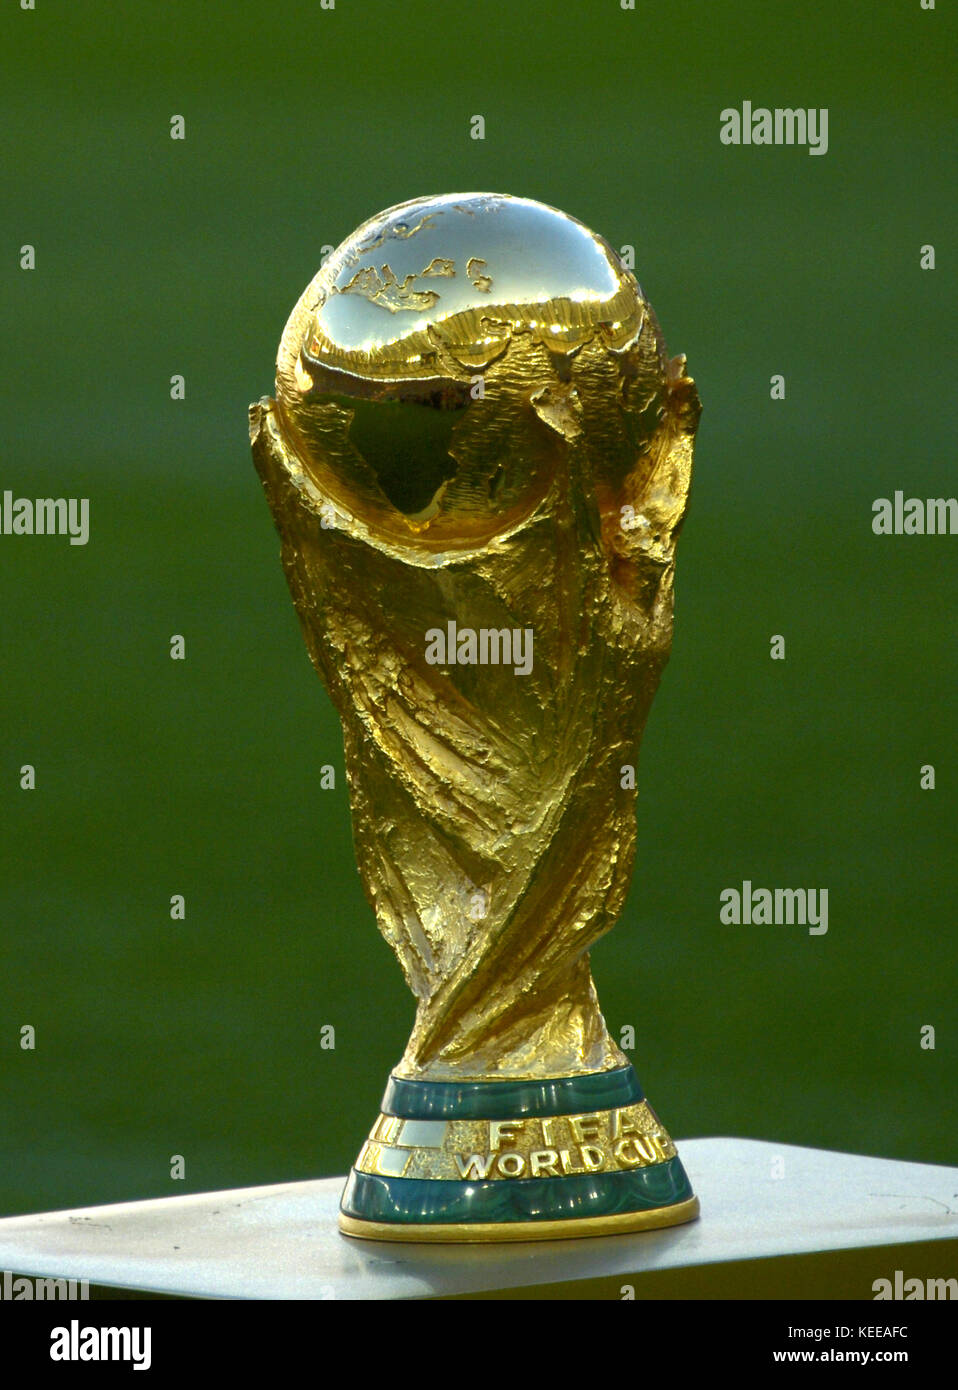 RIO DE JANEIRO, BRAZIL - July 13, 2014: The World Cup Trophy during the celebrations after the 2014 World Cup final game between Germany and Argentina Stock Photo